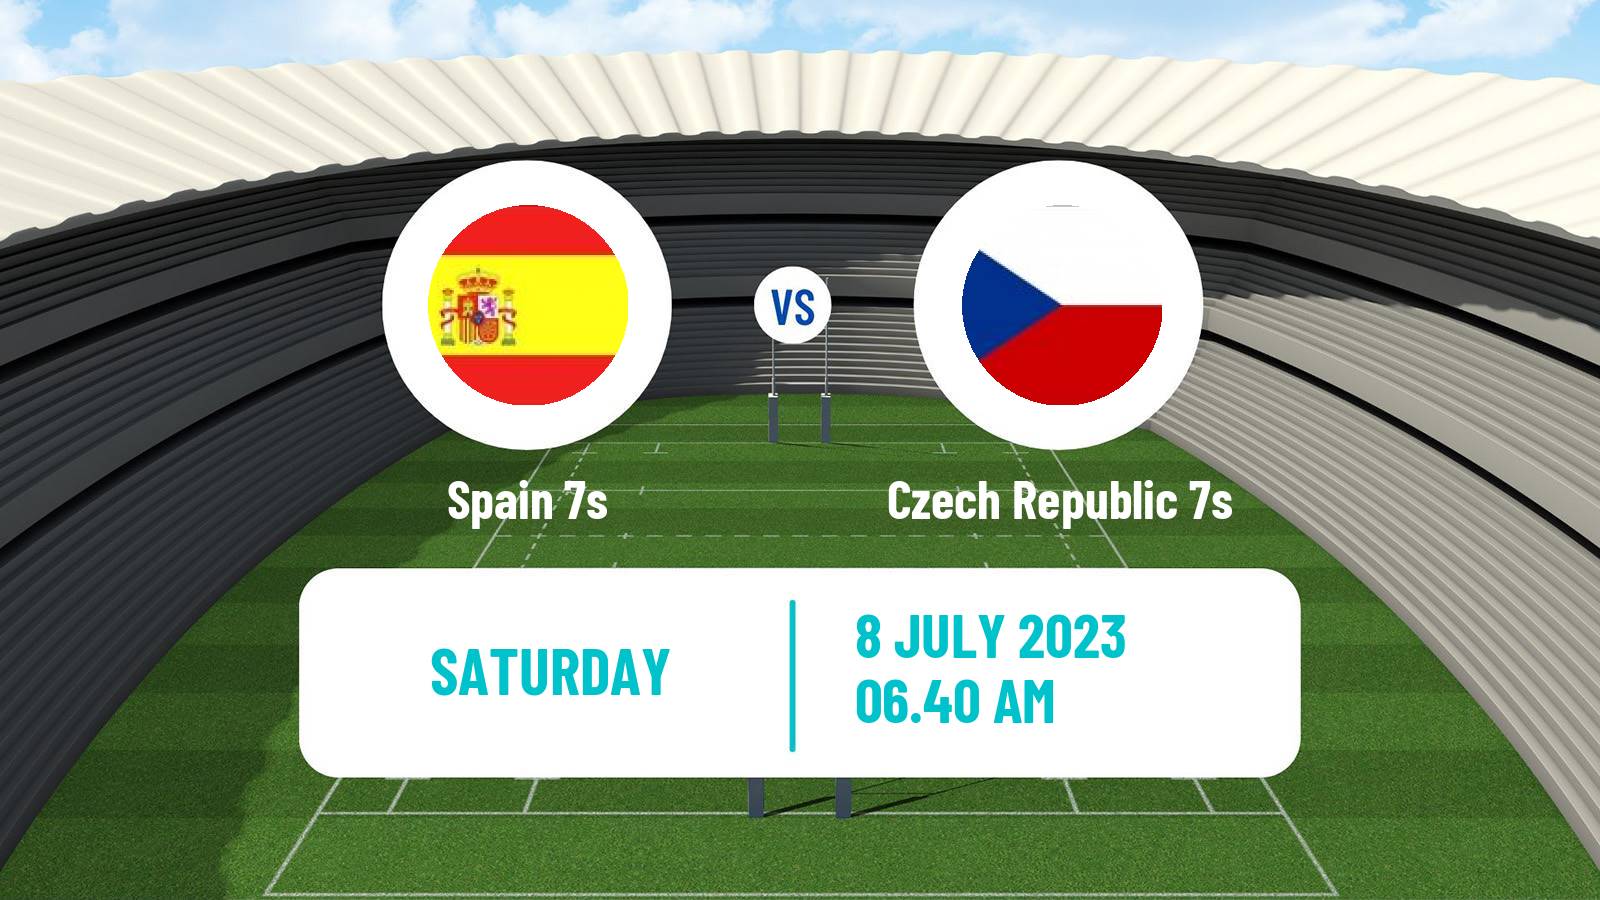 Rugby union Sevens Europe Series - Germany Spain 7s - Czech Republic 7s